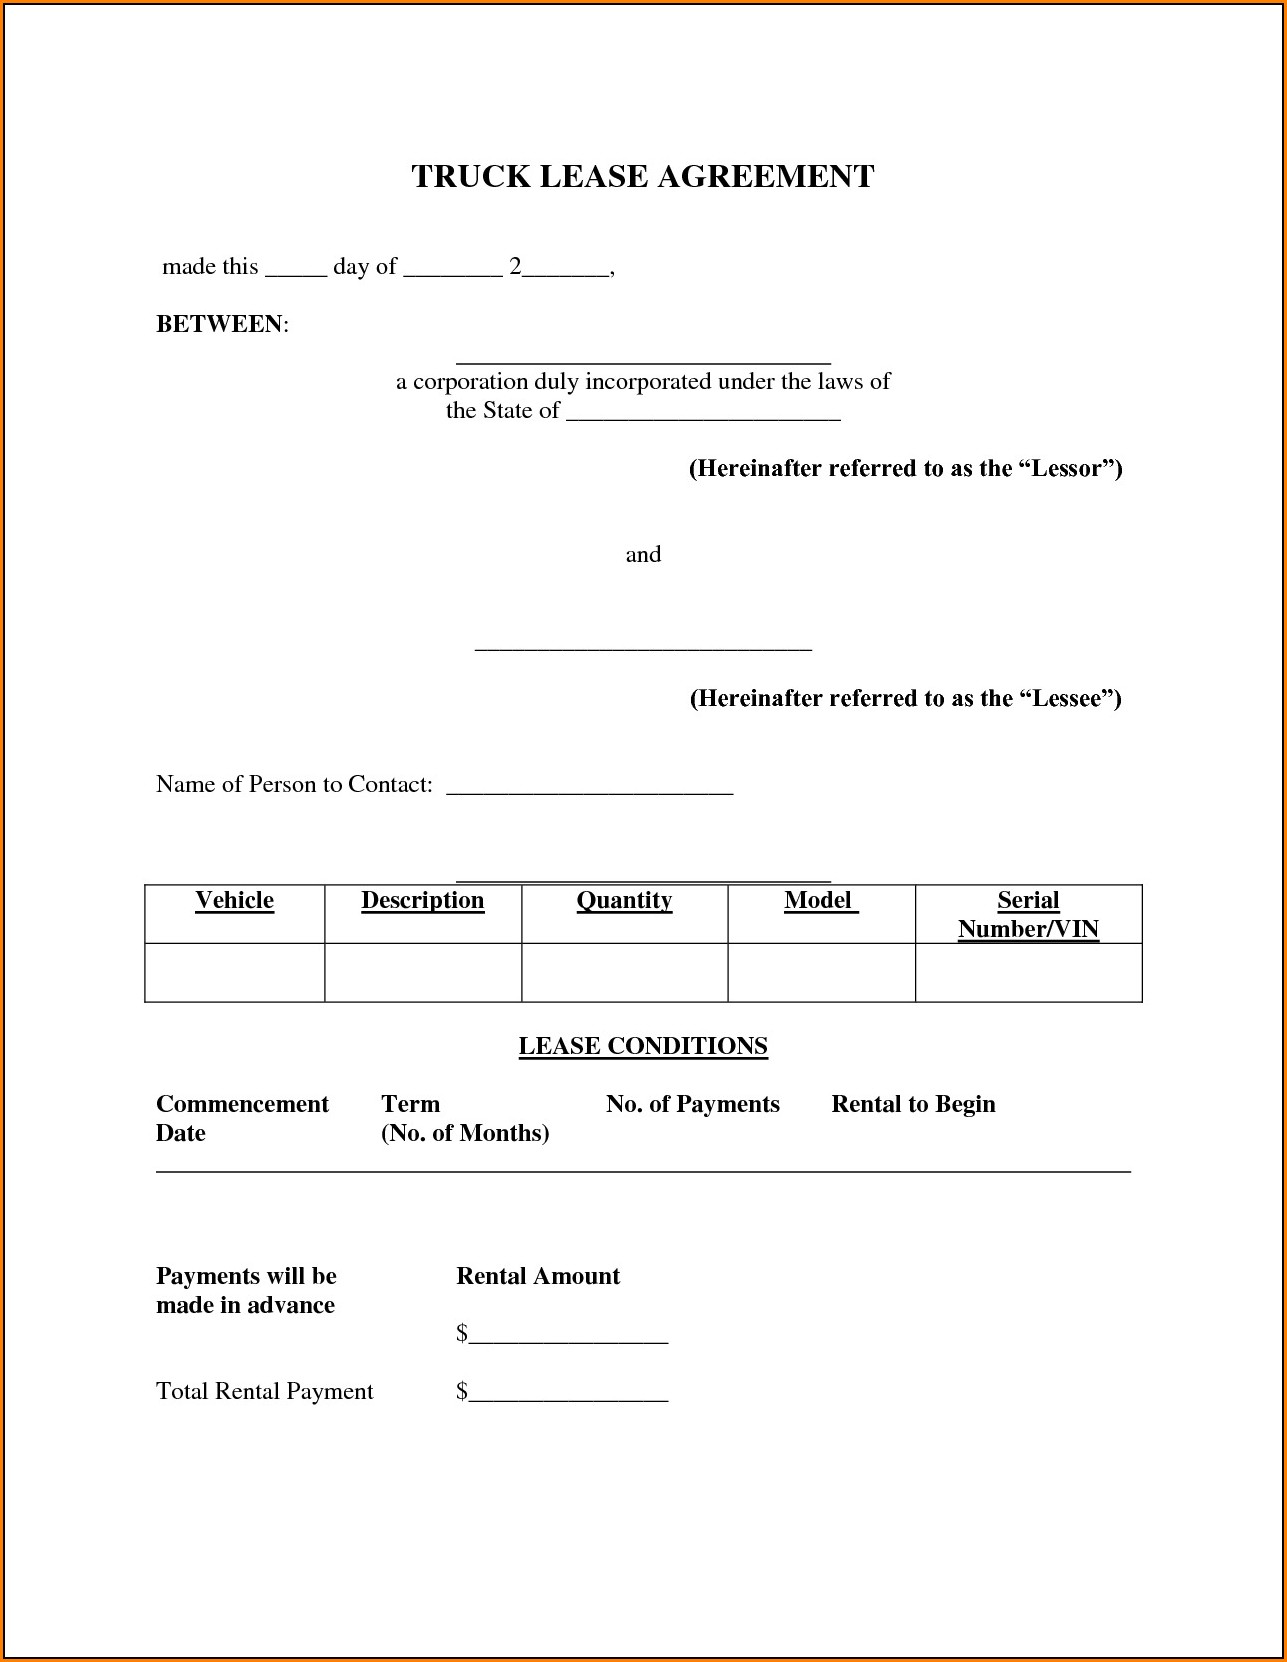 Truck Lease Agreement Template Free